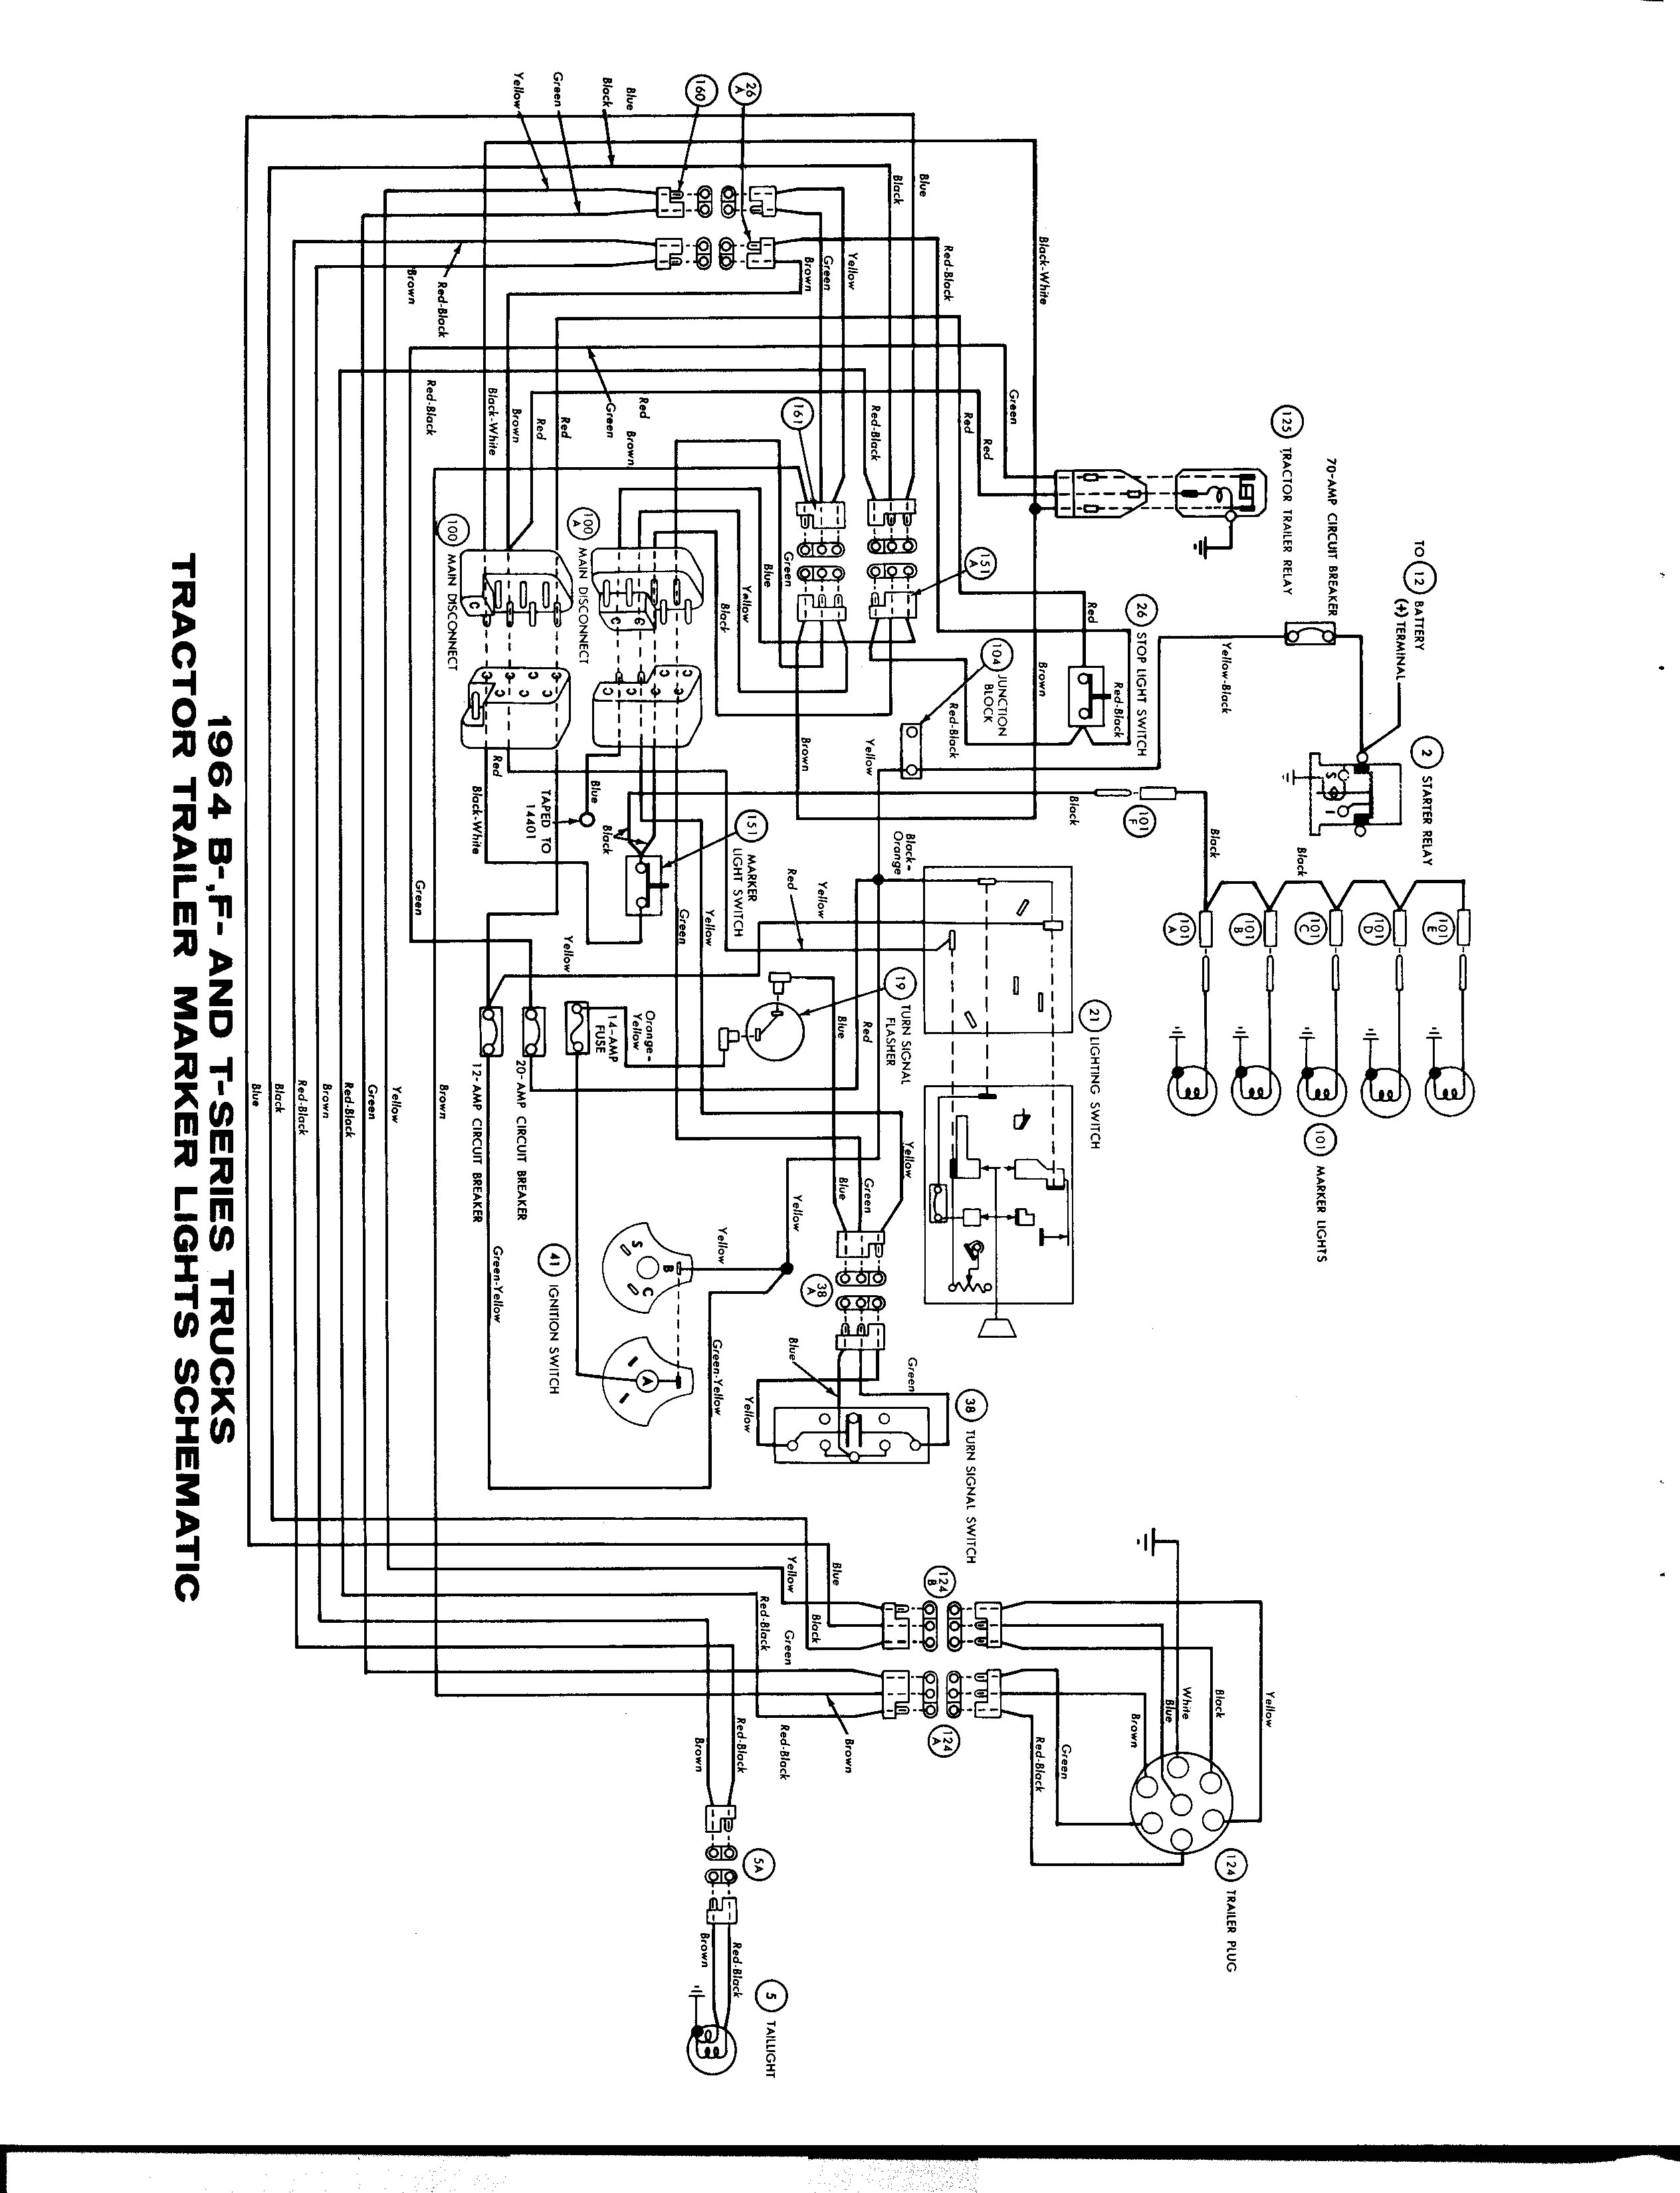 1964 Ford tractor wiring diagram #5